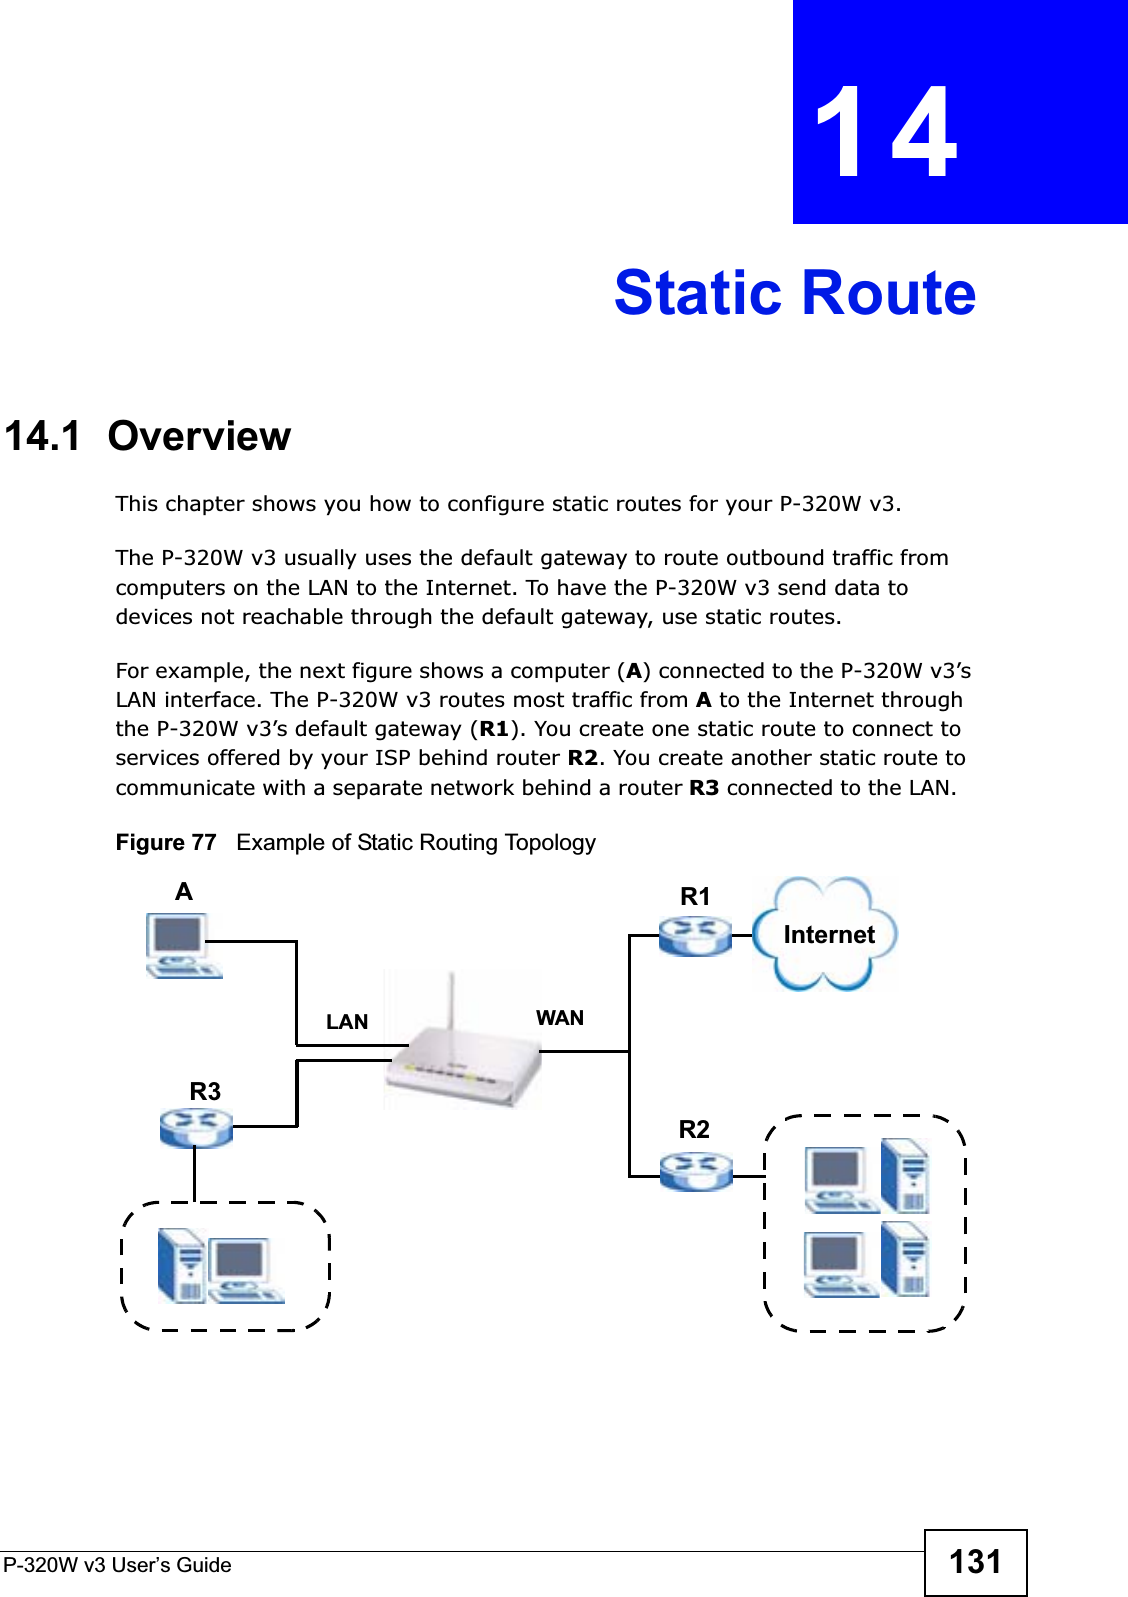 P-320W v3 User’s Guide 131CHAPTER 14Static Route14.1  OverviewThis chapter shows you how to configure static routes for your P-320W v3.The P-320W v3 usually uses the default gateway to route outbound traffic from computers on the LAN to the Internet. To have the P-320W v3 send data to devices not reachable through the default gateway, use static routes.For example, the next figure shows a computer (A) connected to the P-320W v3’s LAN interface. The P-320W v3 routes most traffic from Ato the Internet through the P-320W v3’s default gateway (R1). You create one static route to connect to services offered by your ISP behind router R2. You create another static route to communicate with a separate network behind a router R3 connected to the LAN.   Figure 77   Example of Static Routing TopologyWANR1R2AR3LANInternet